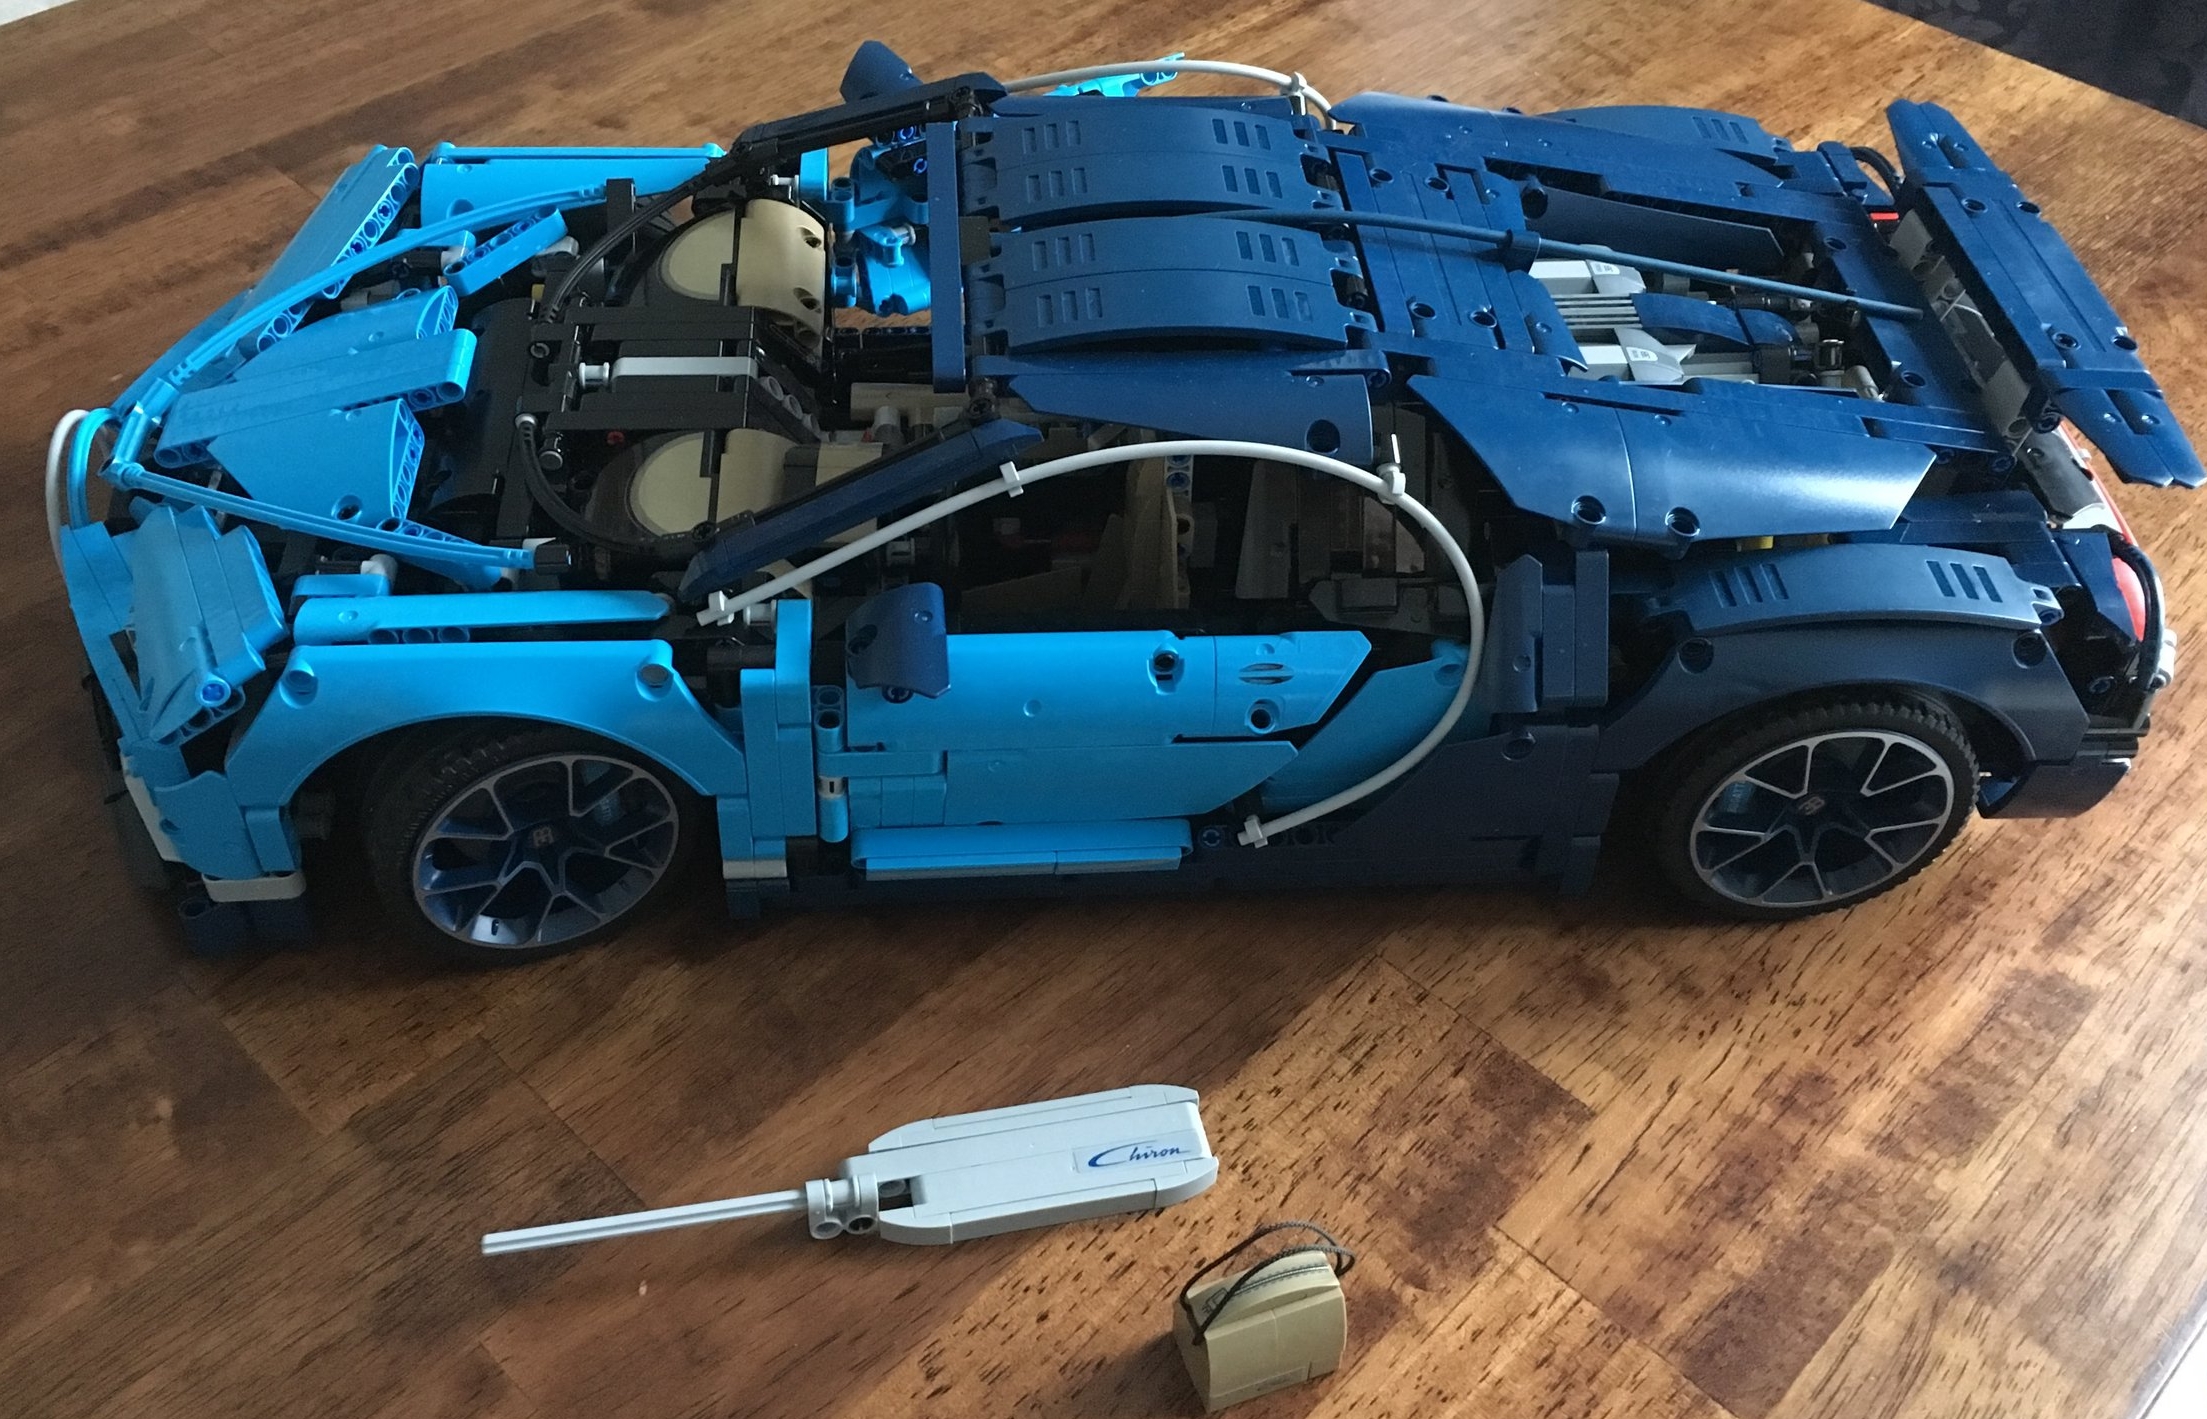 Admit It, You Want To Touch And Drive The LEGO Bugatti Chiron, Don't You?